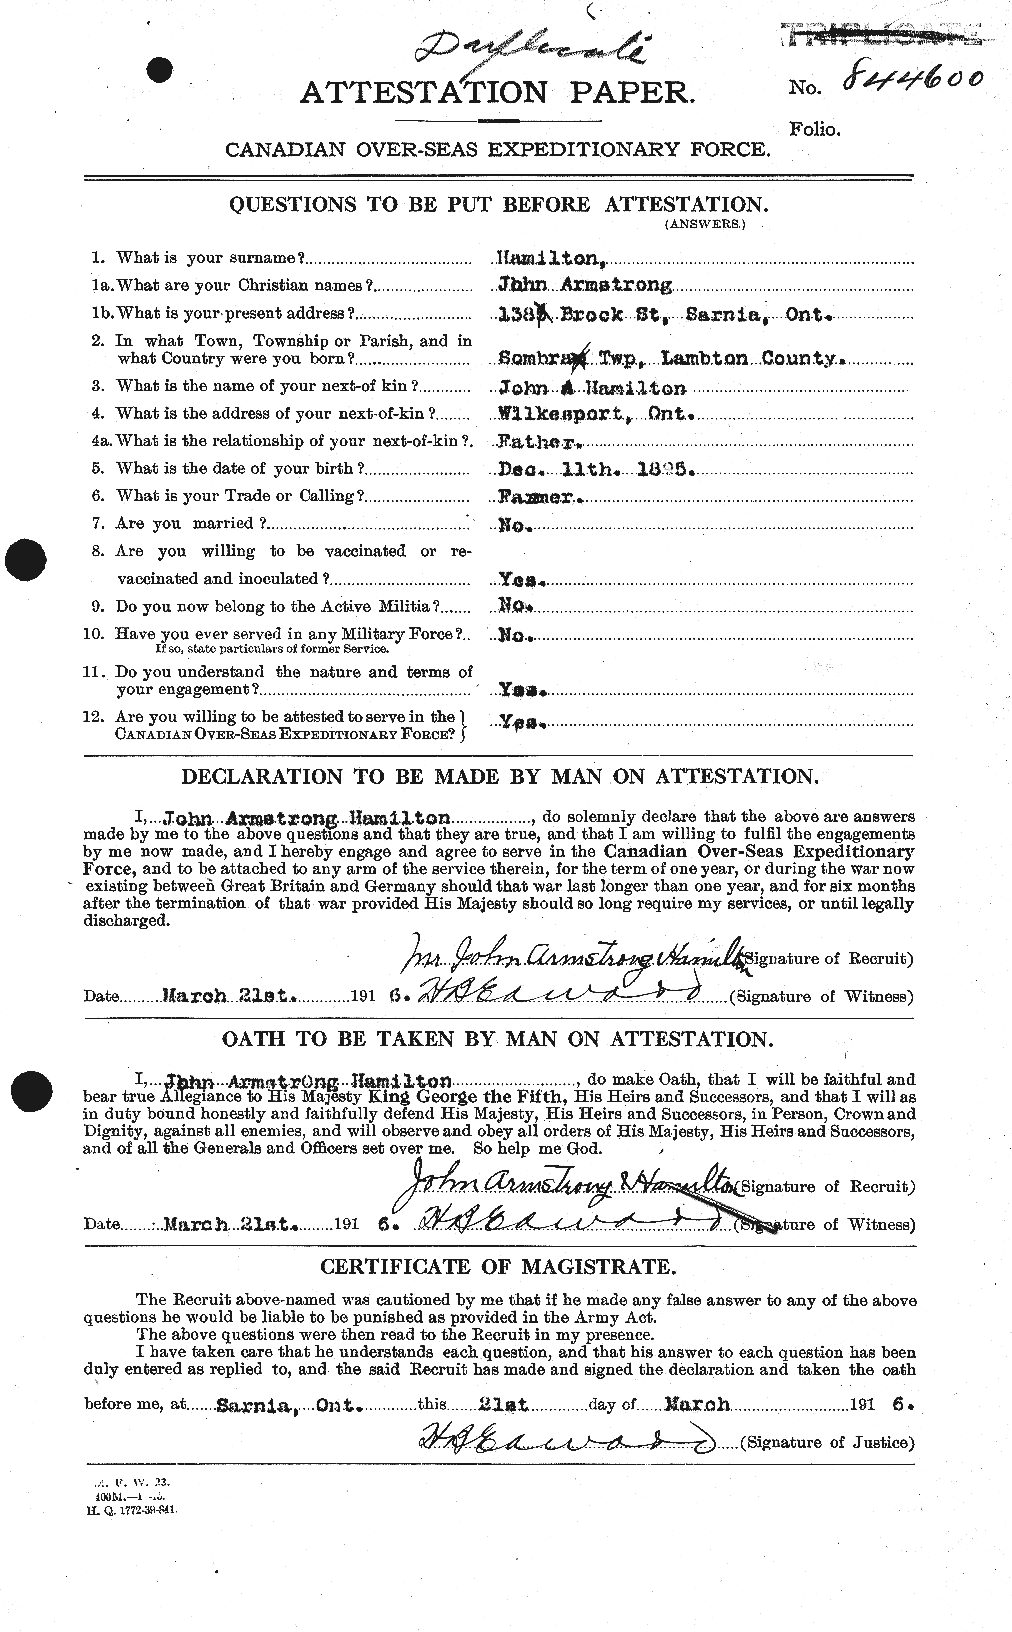 Personnel Records of the First World War - CEF 373066a